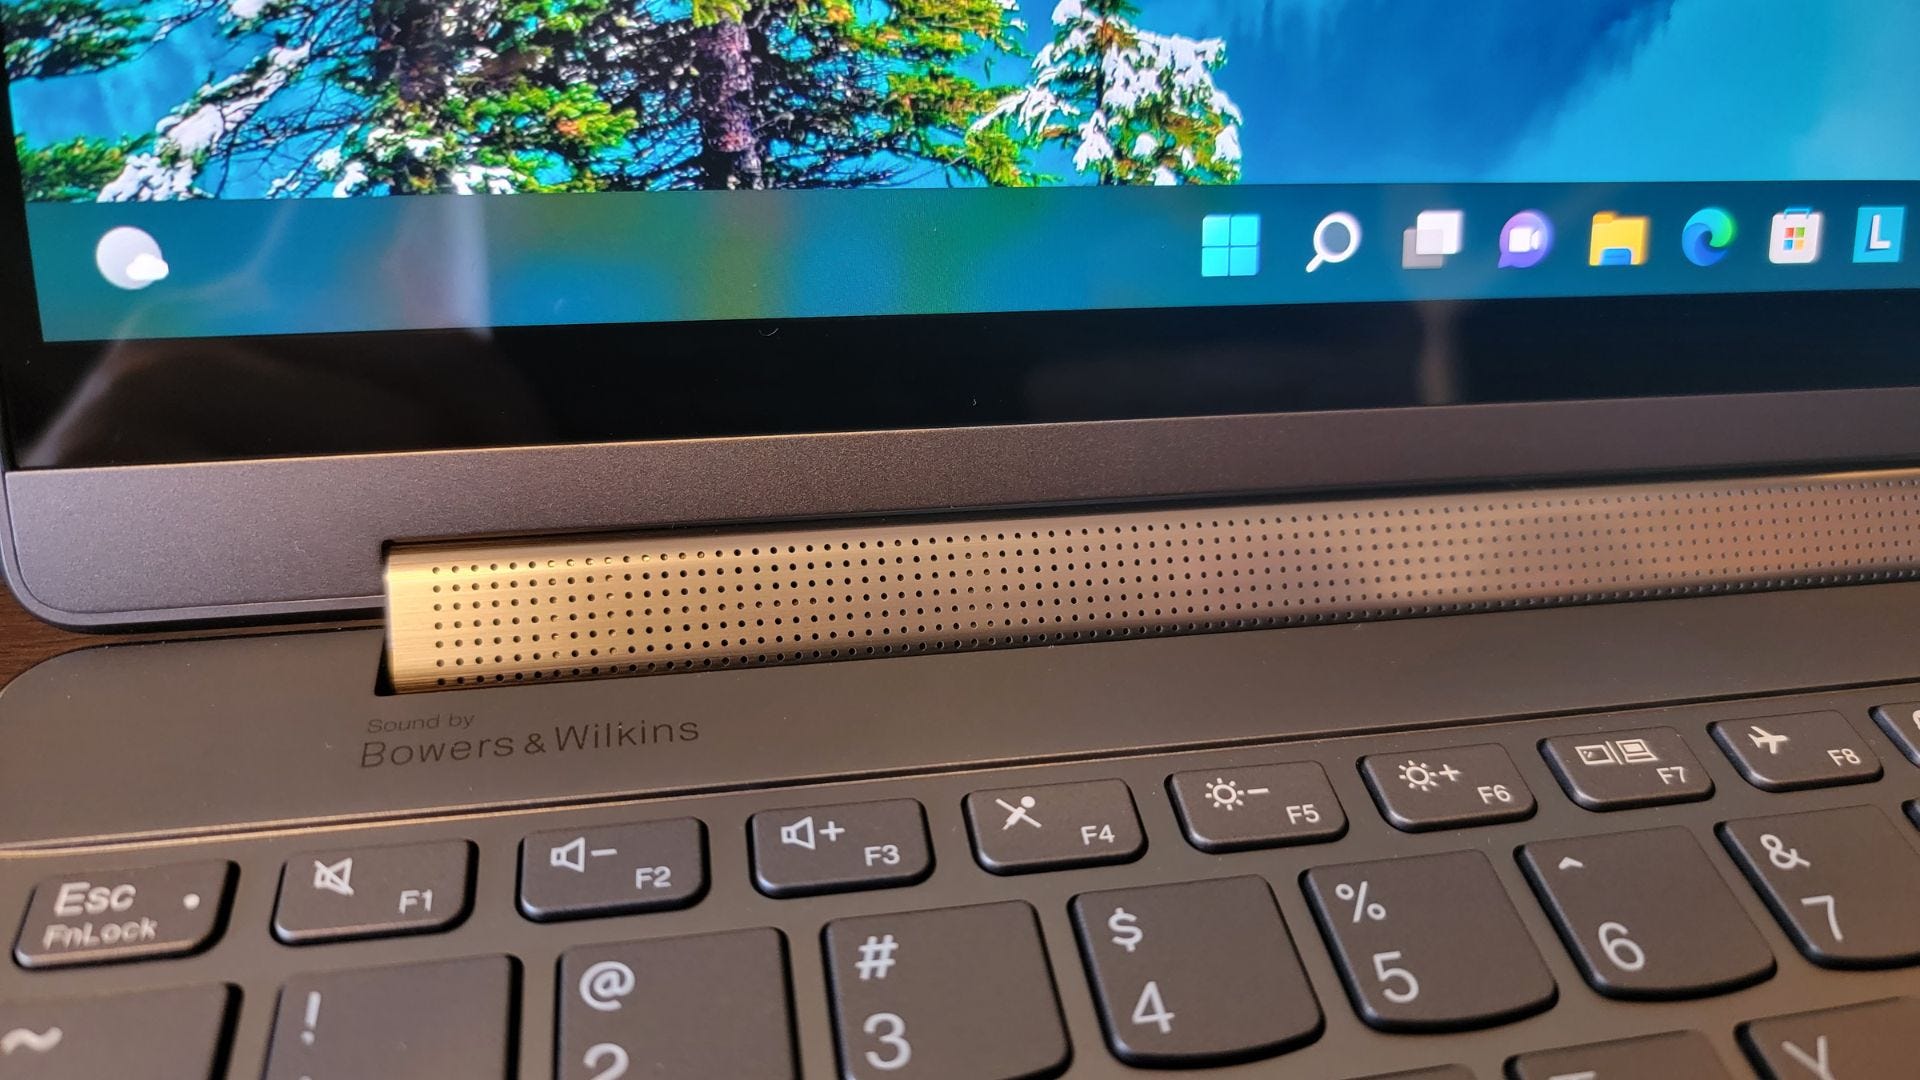 bowers and wilkins 360 sound bar on the lenovo yoga 9i laptop